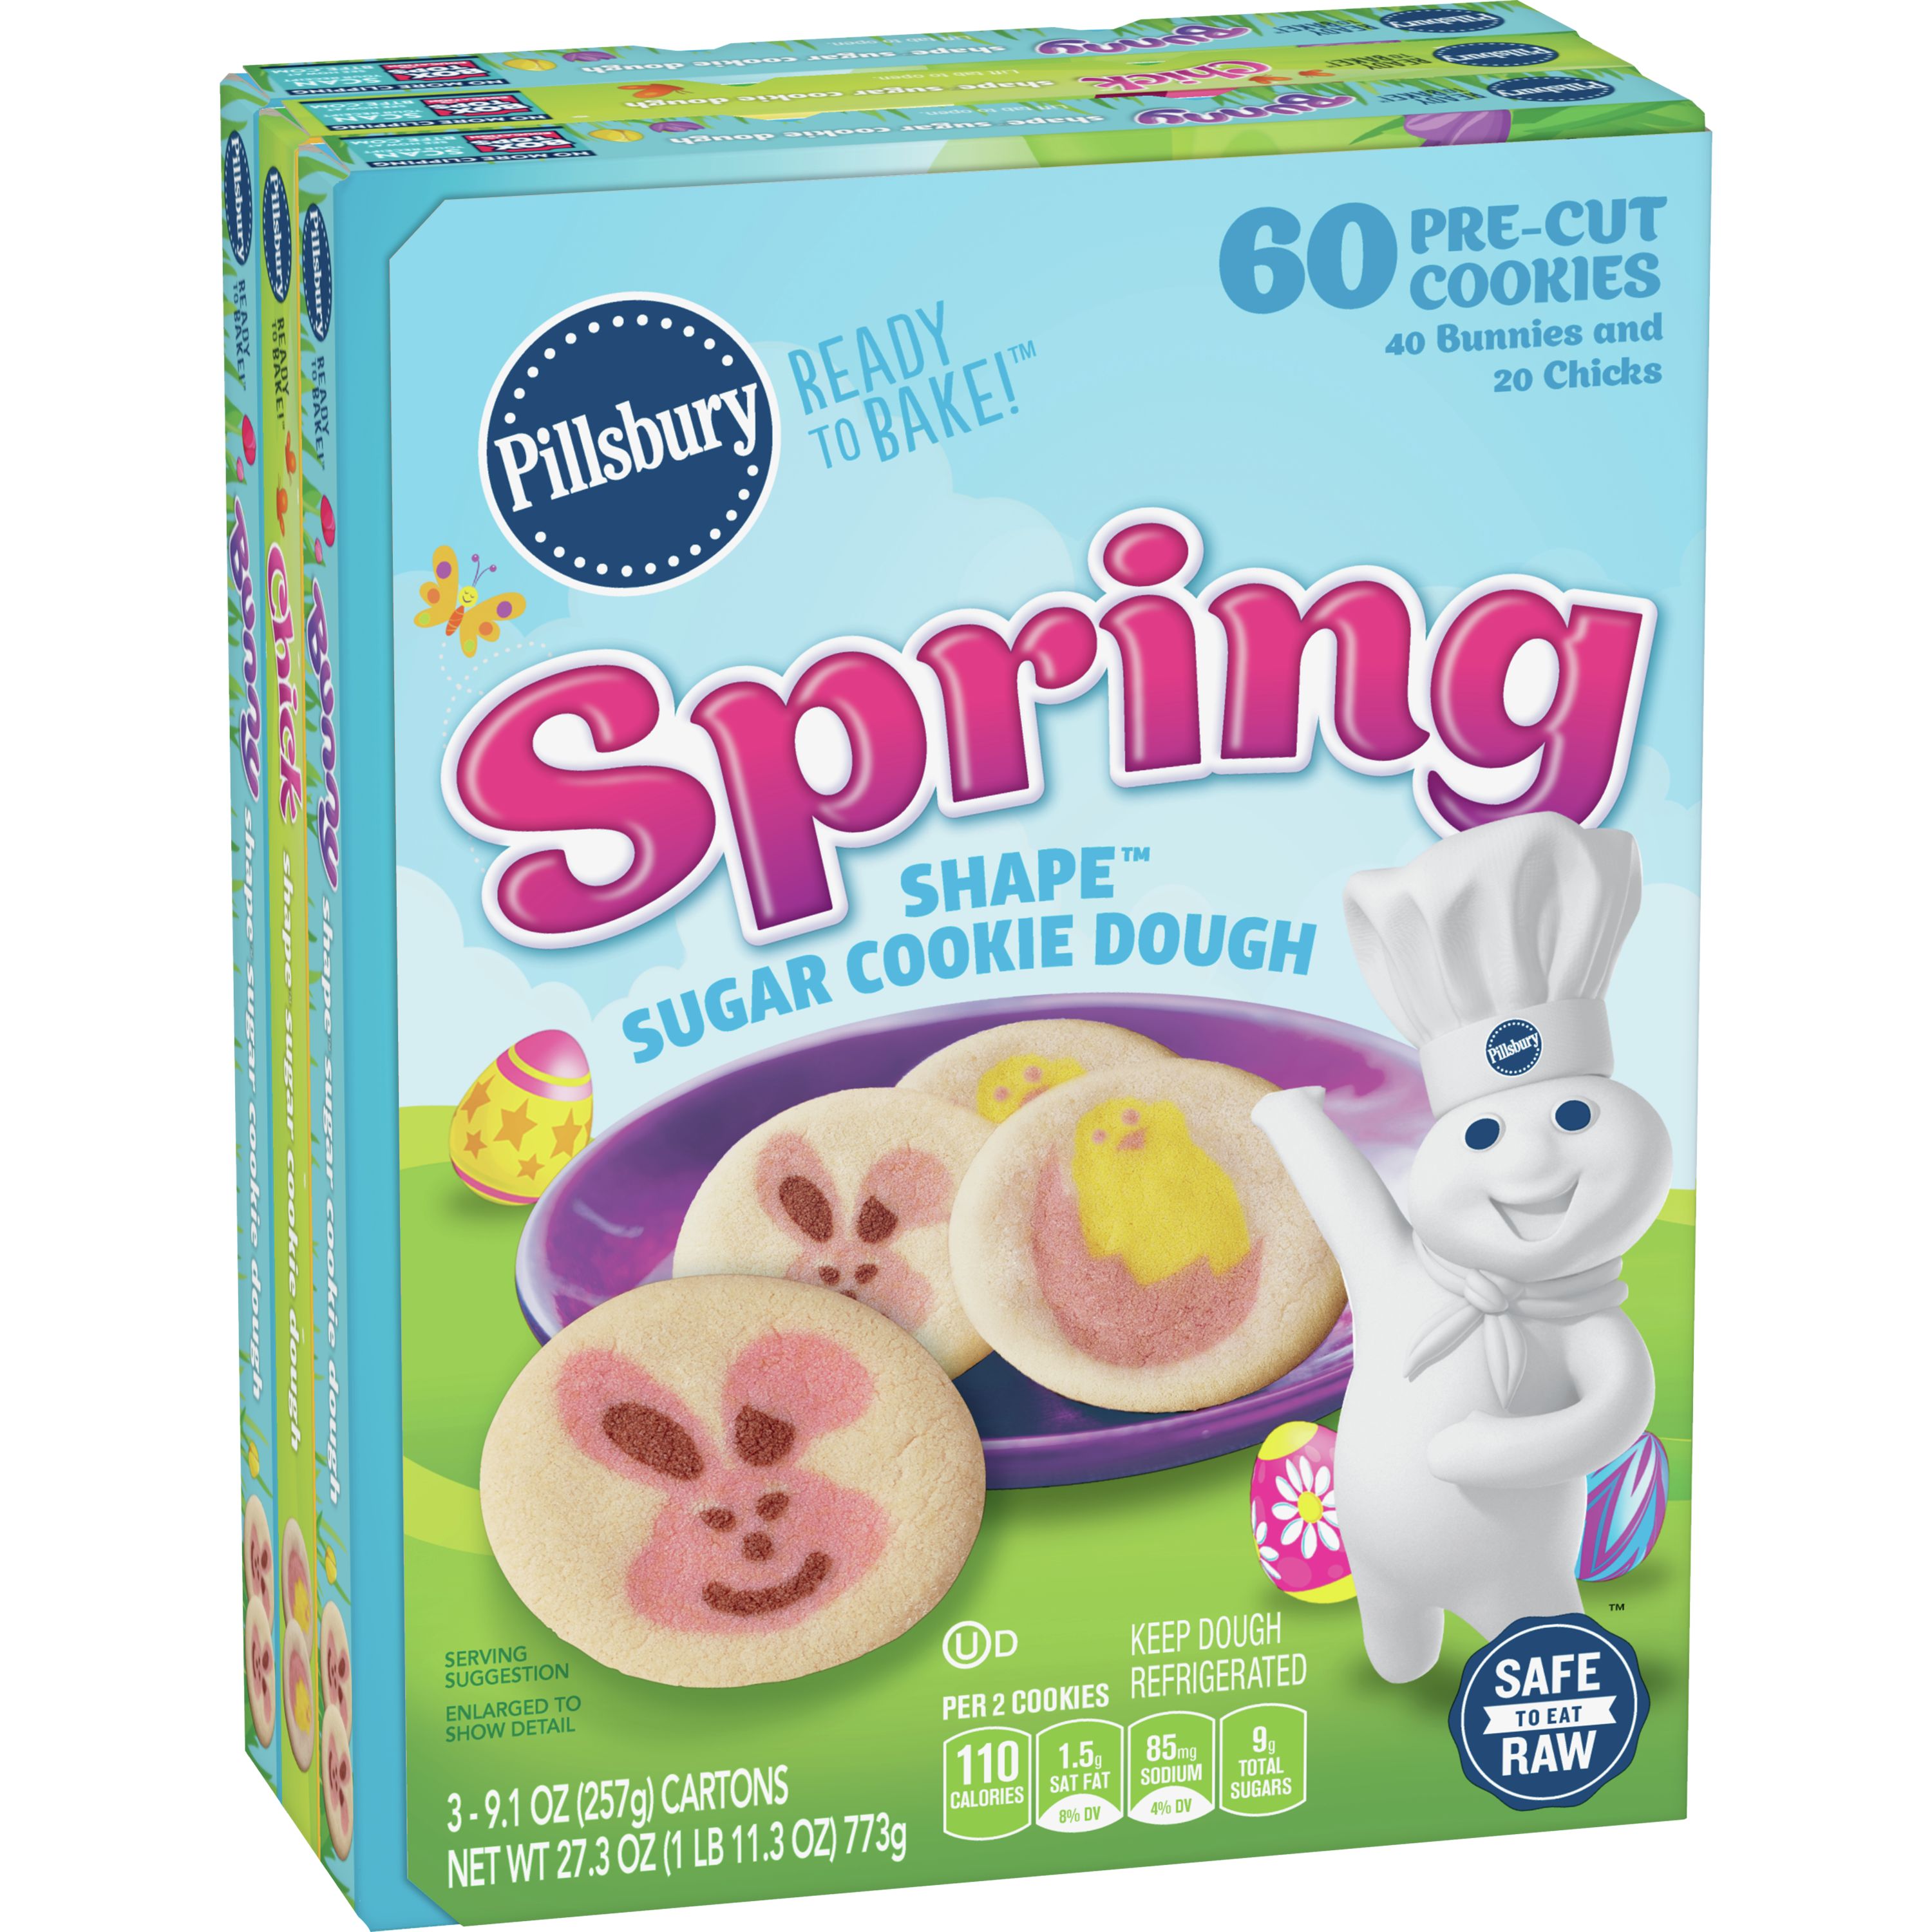 Pillsbury Easter Cookies Are Back For Spring, 55% OFF